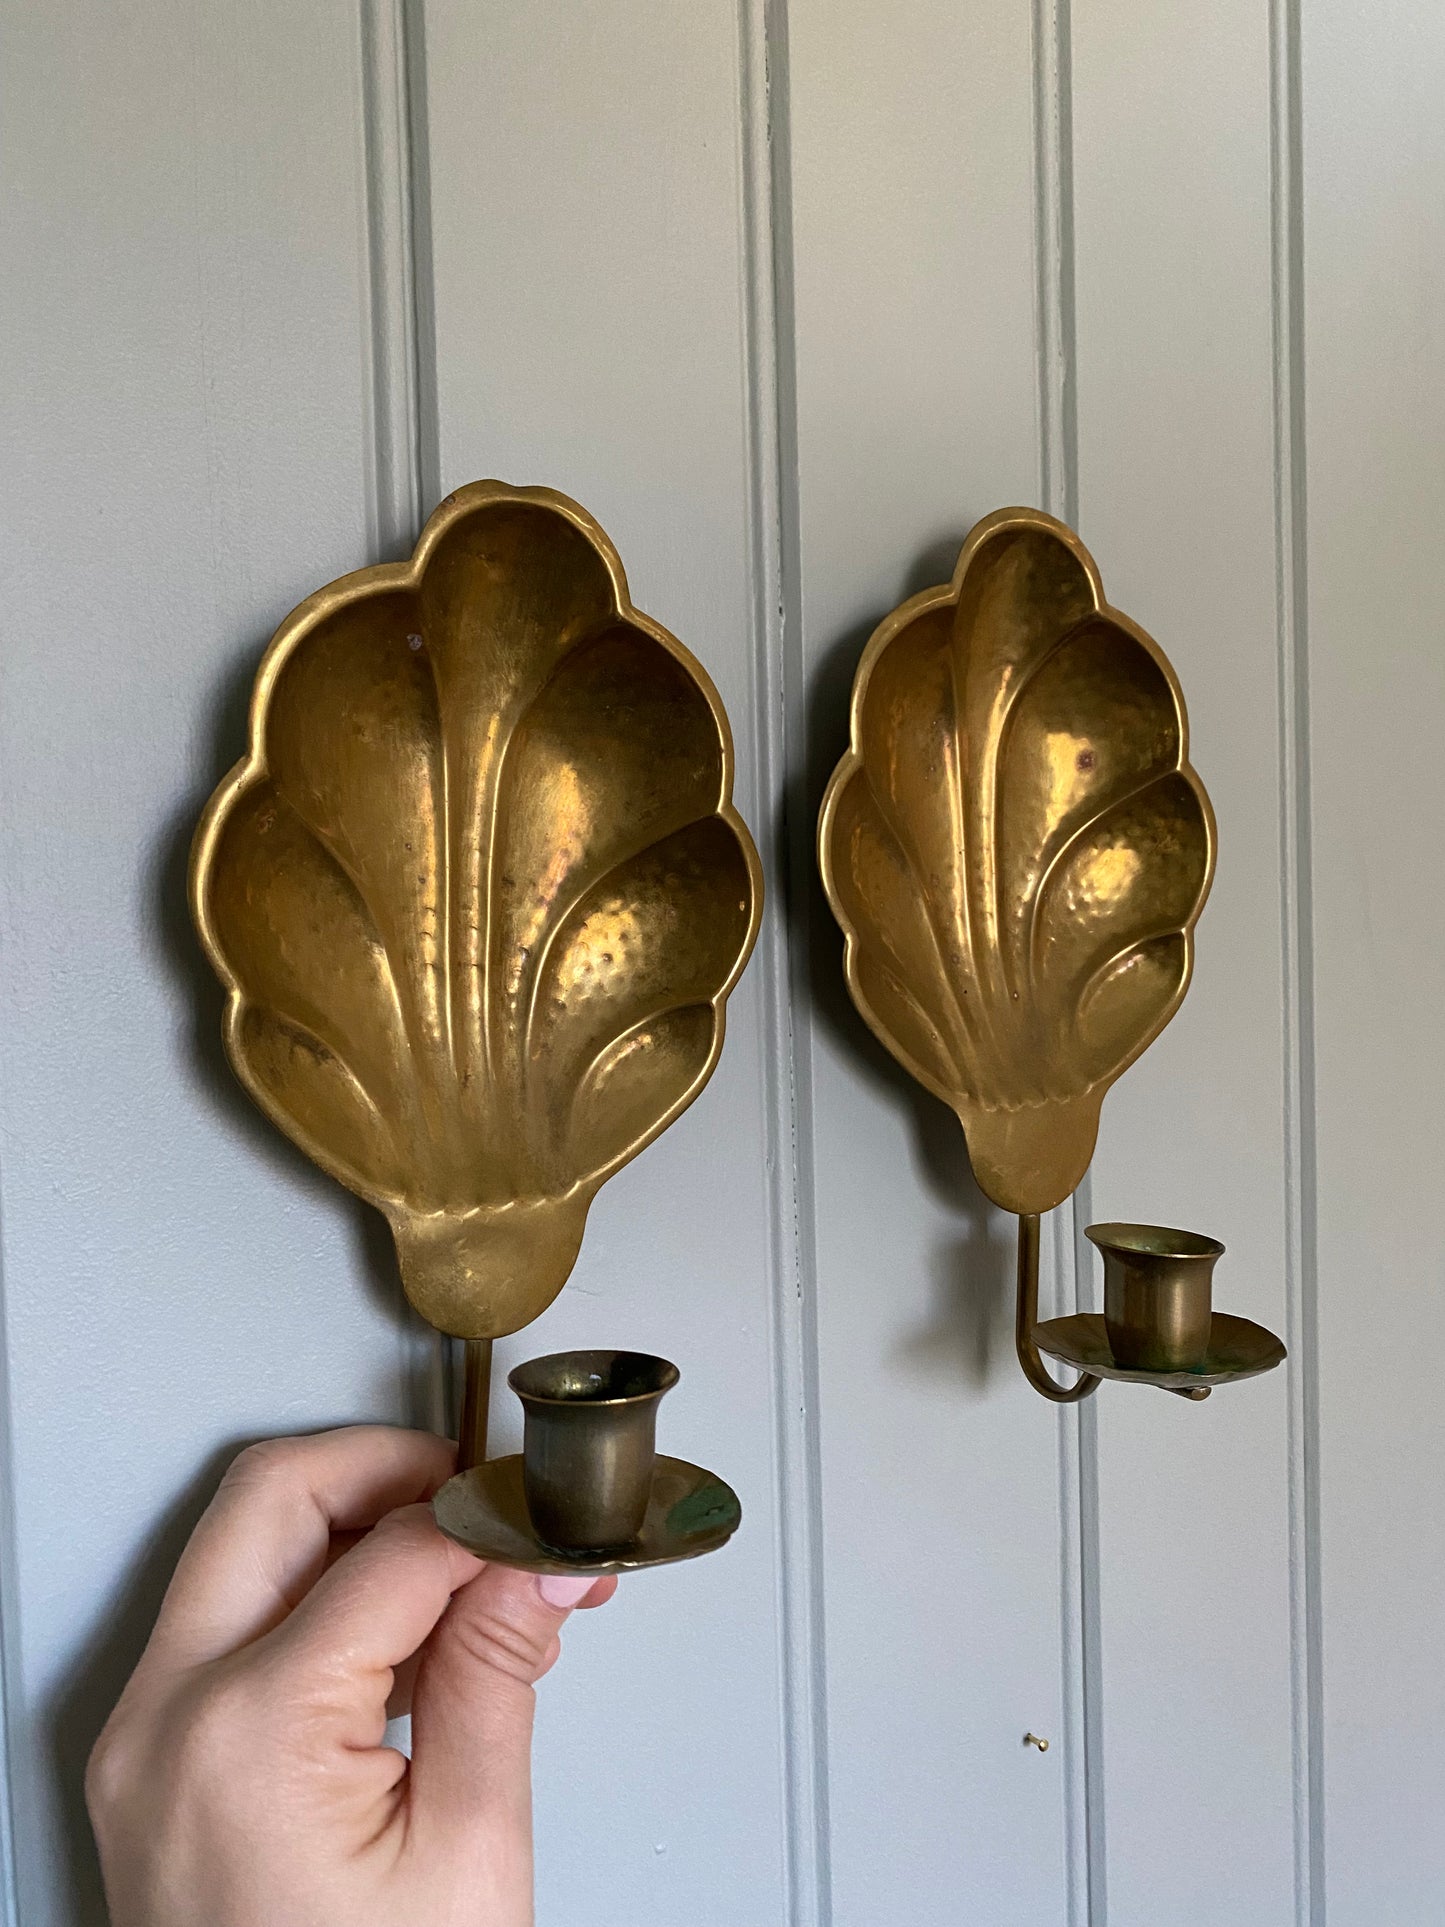 Pair of brass wall sconces